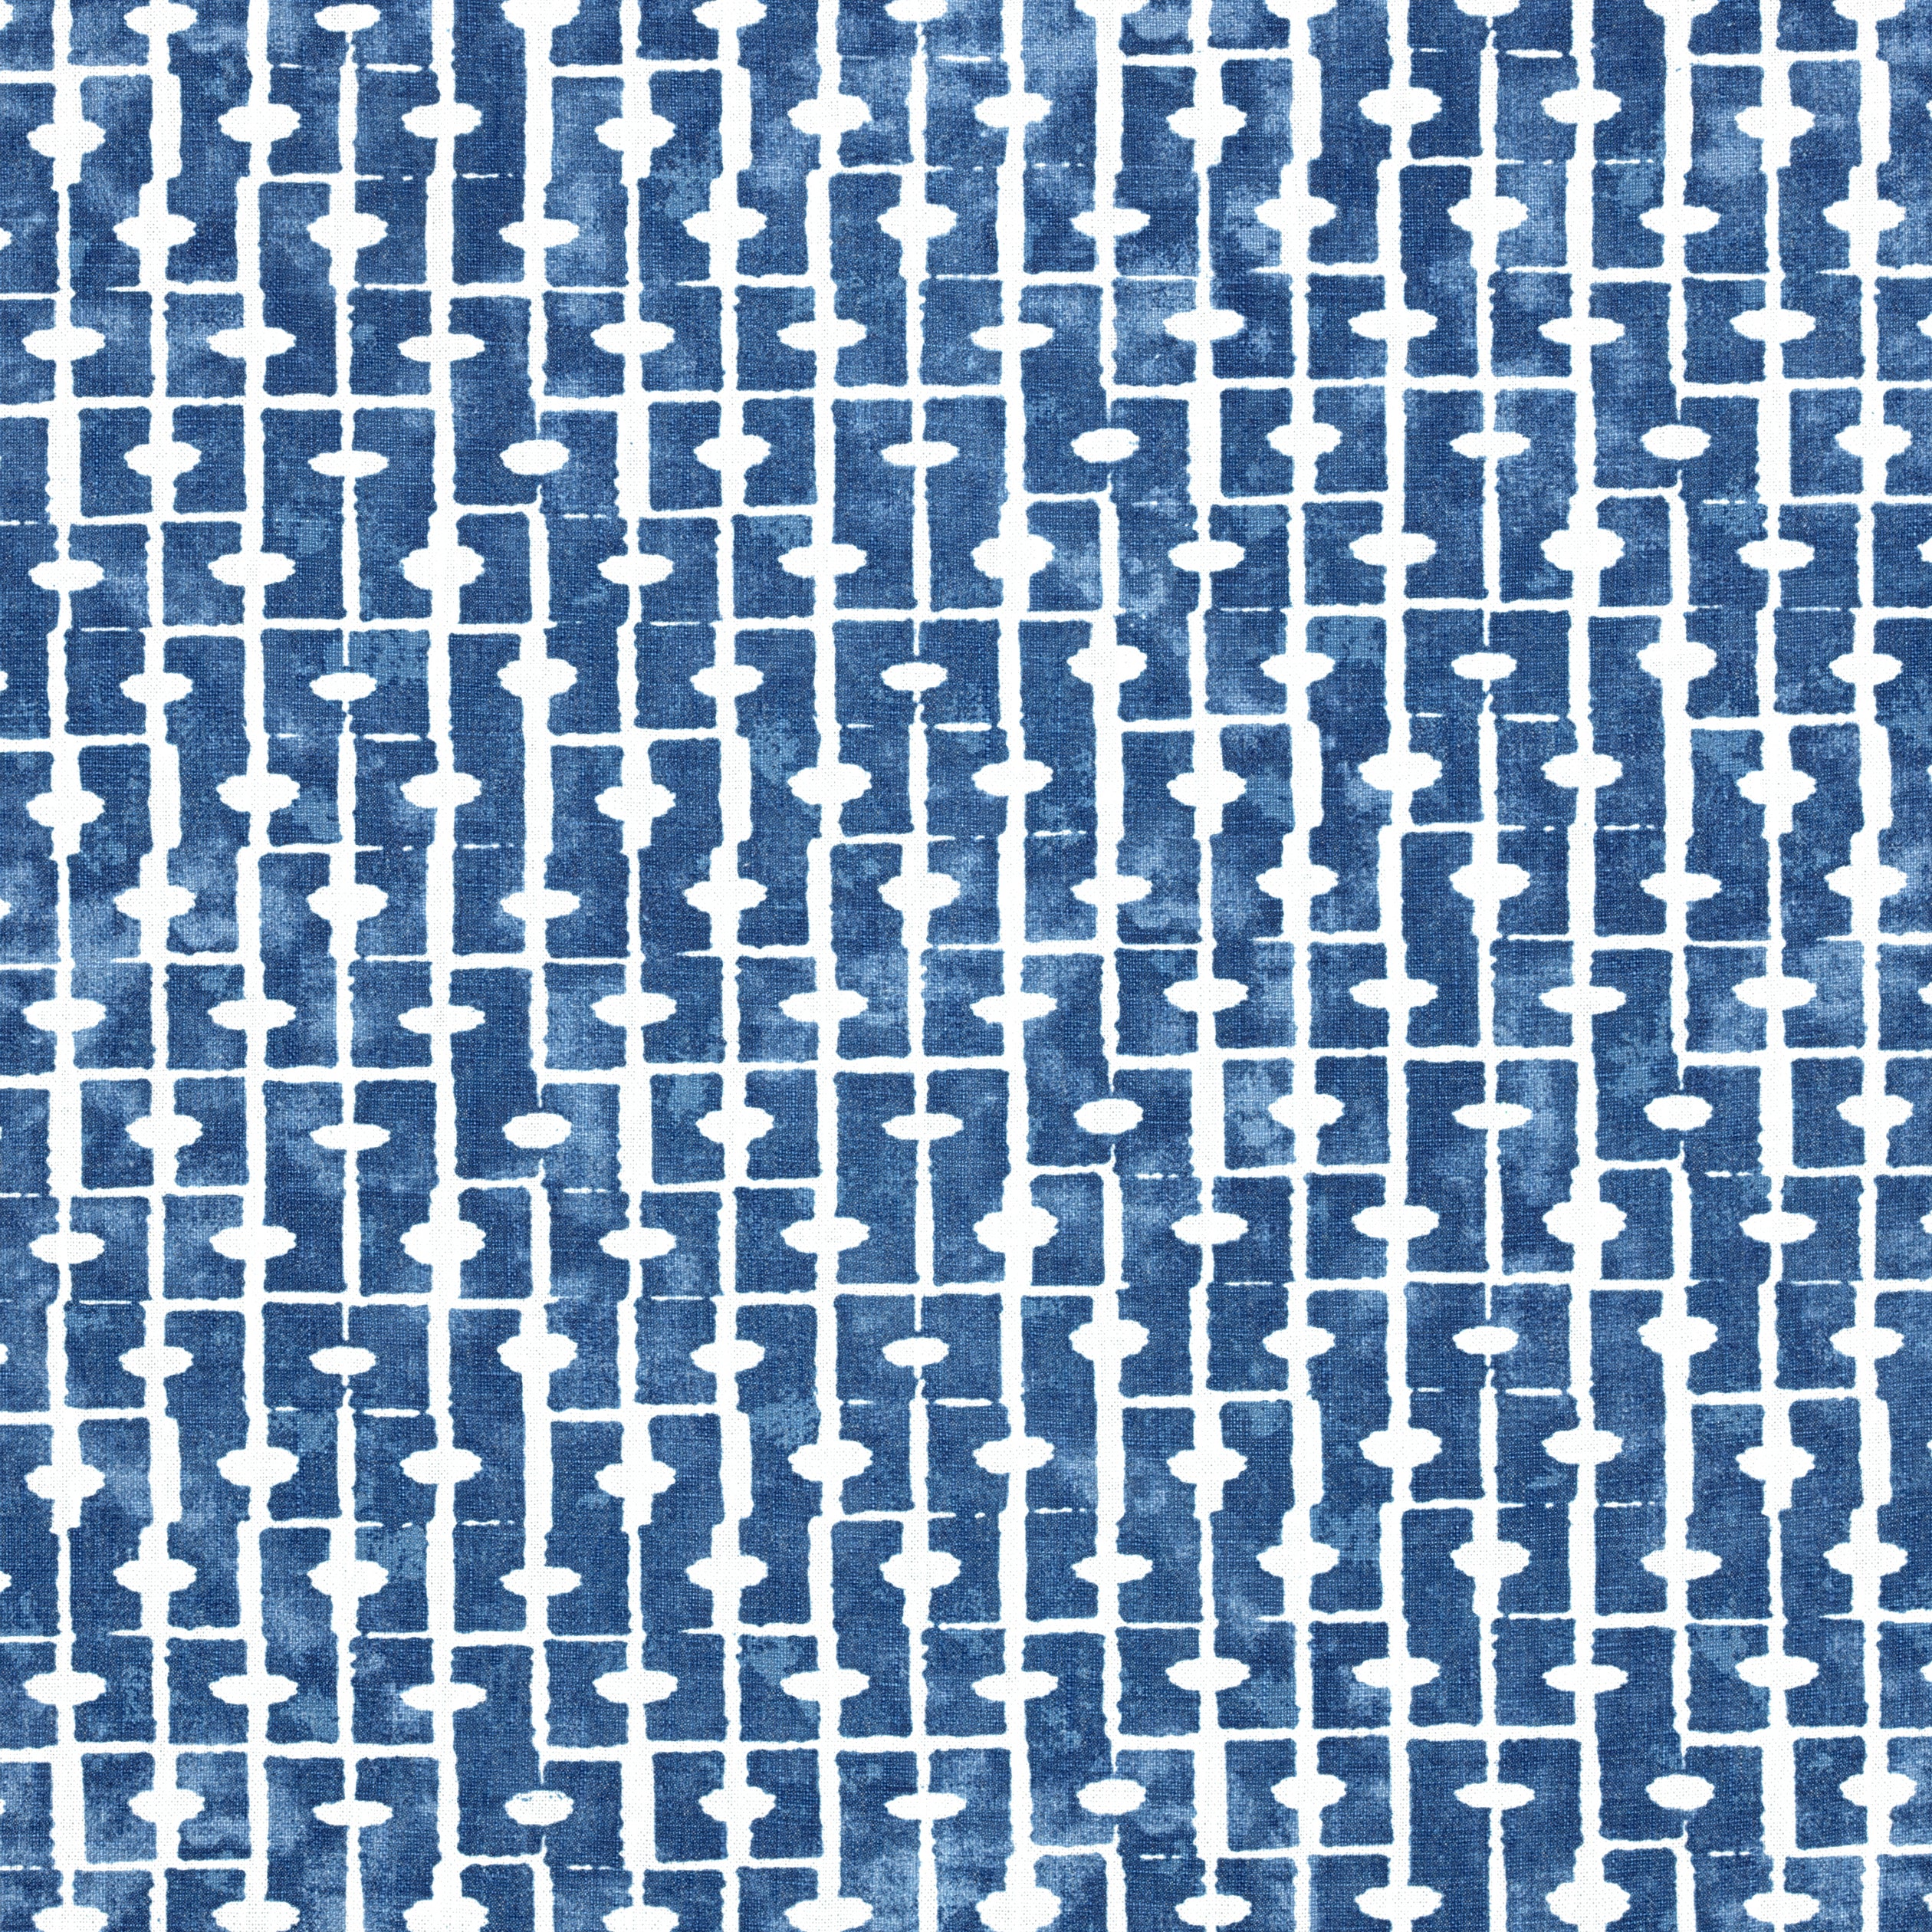 Haven fabric in navy color - pattern number F914310 - by Thibaut in the Canopy collection